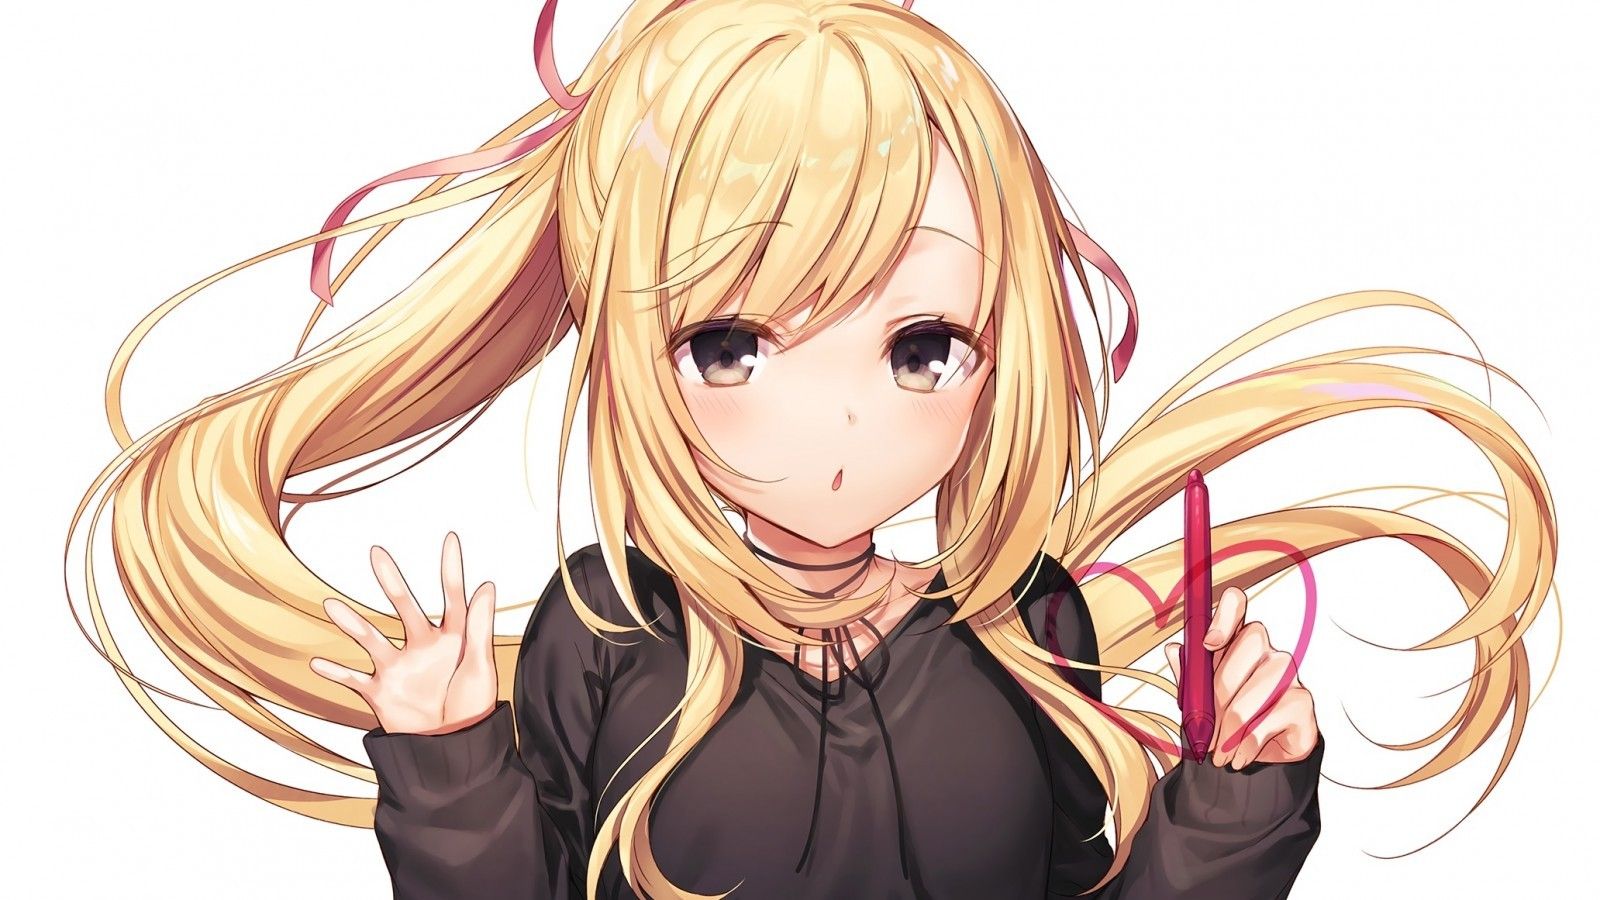 Anime Girl with Blonde Hair Sticker - wide 5